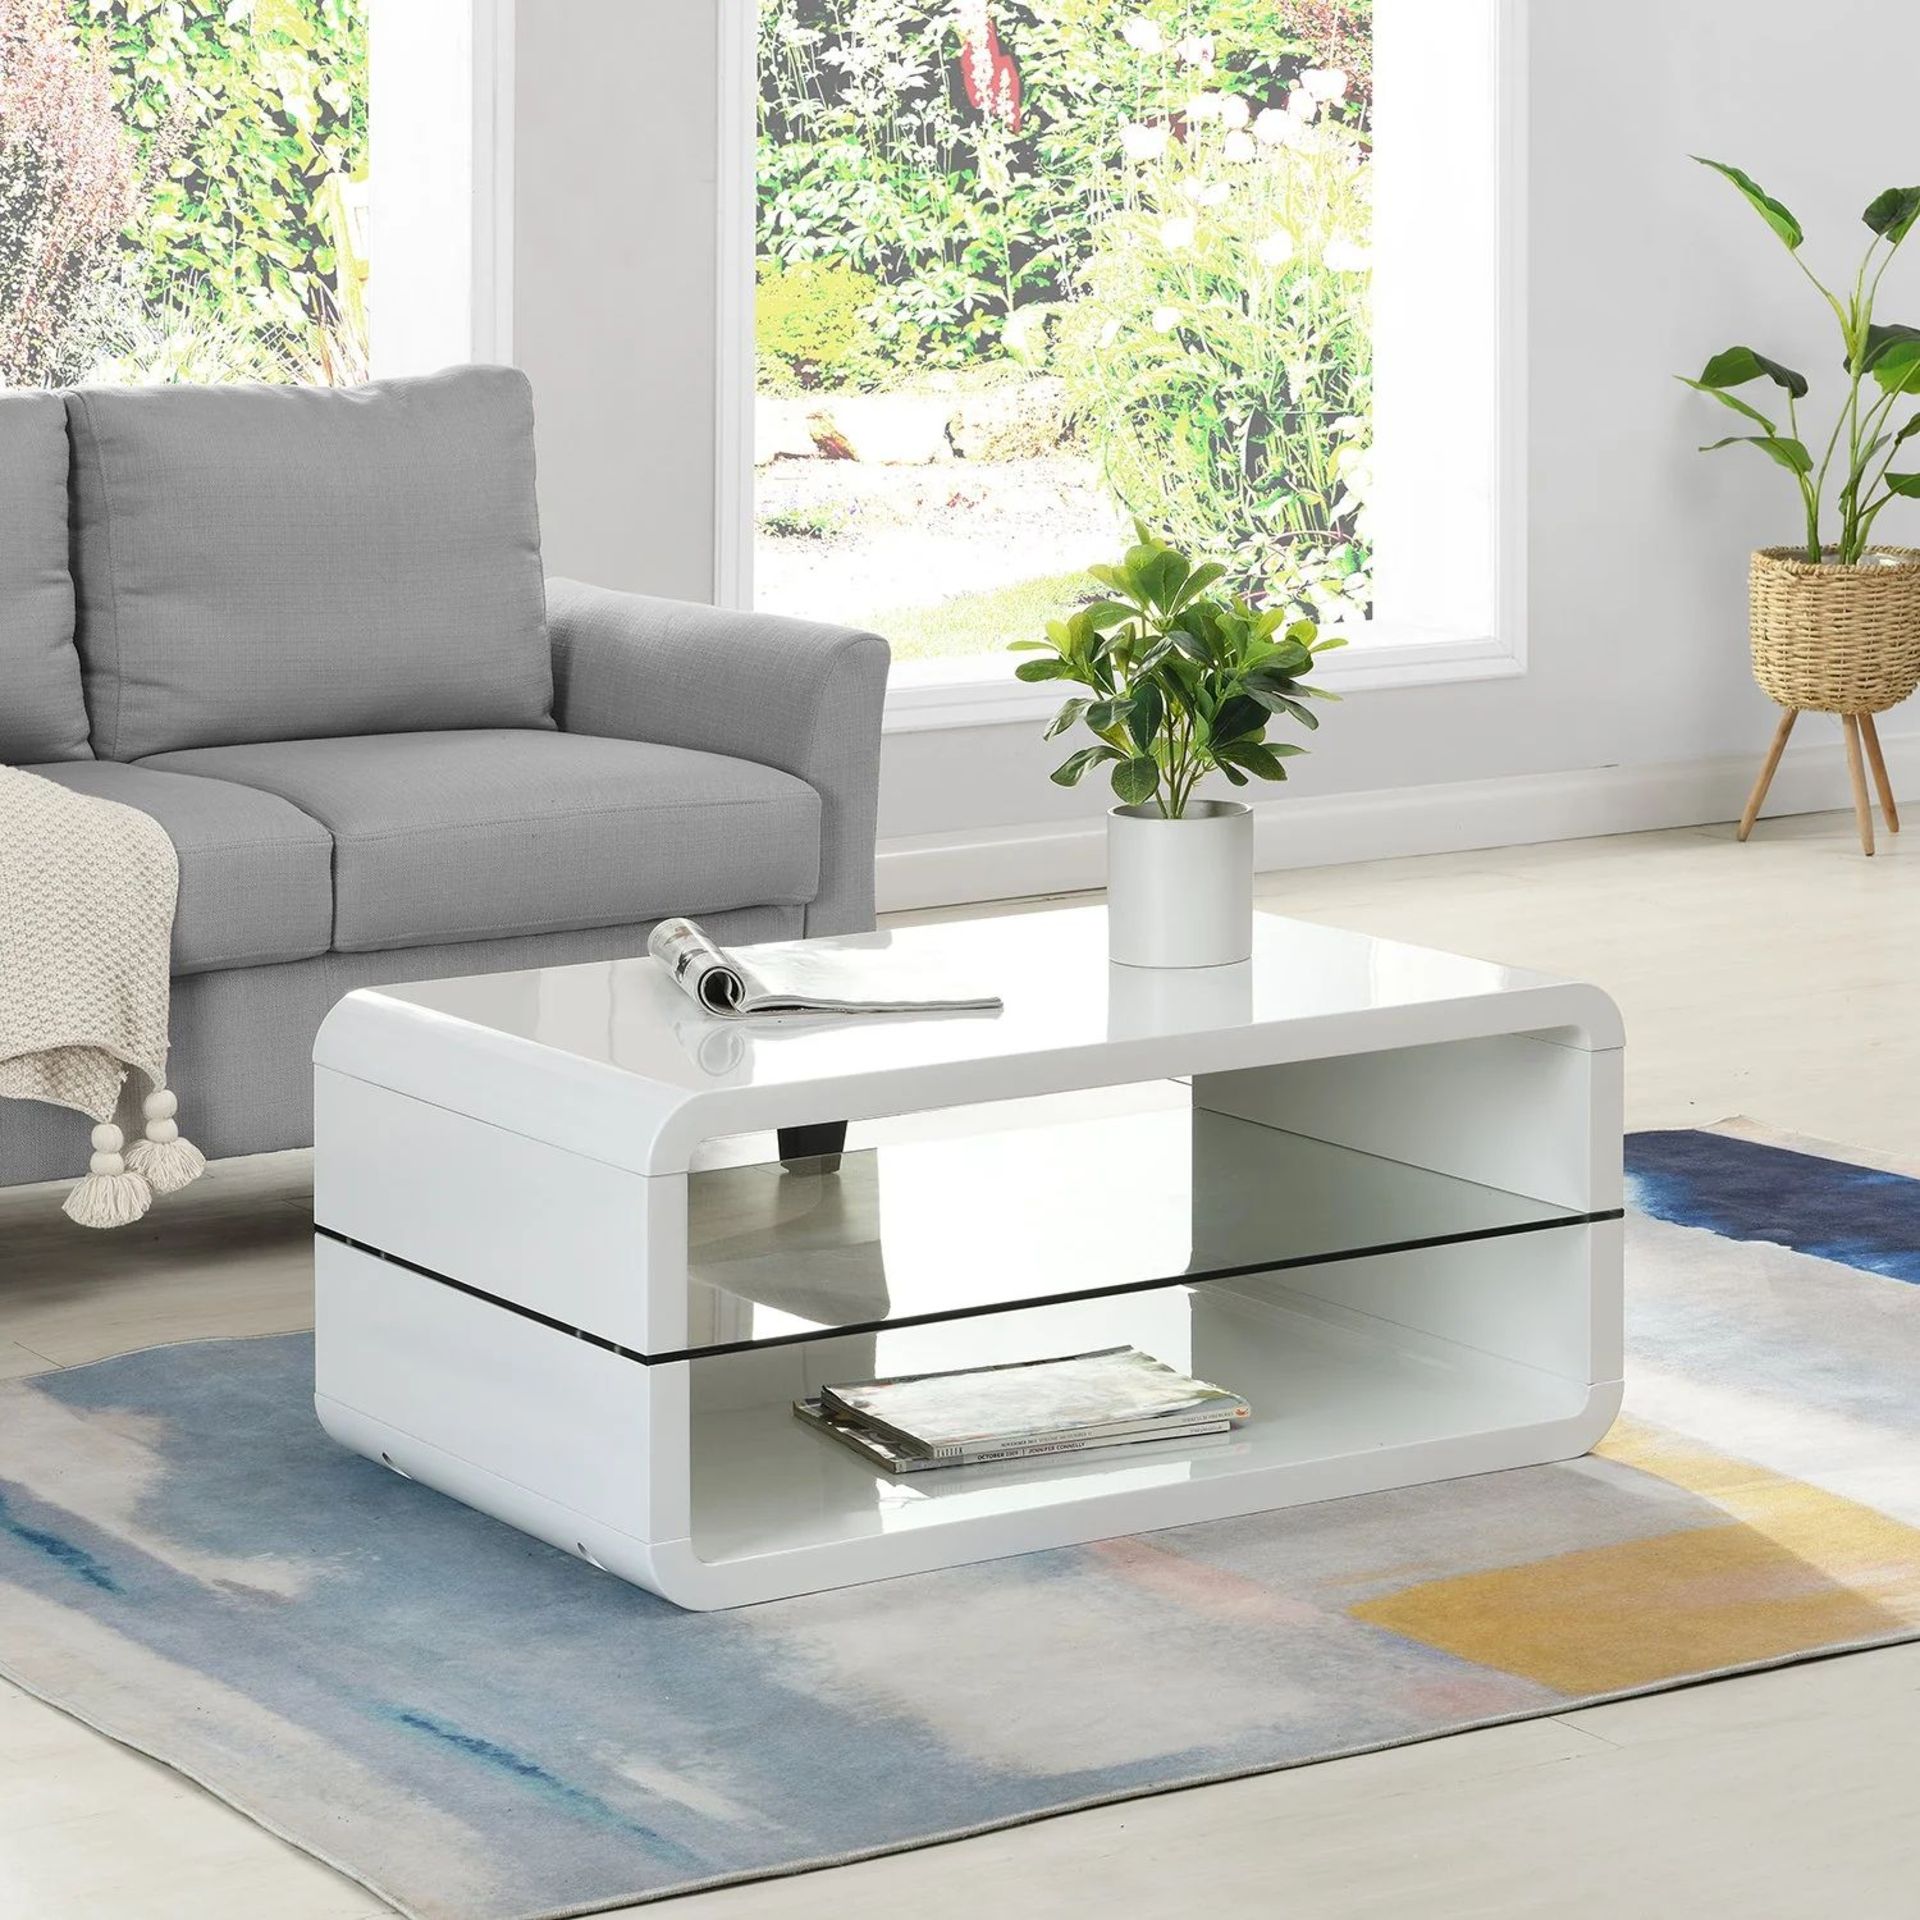 Lucent White High Gloss and Glass Shelf Coffee Table. - BI.8. RRP £199.99. Our Lucent coffee table